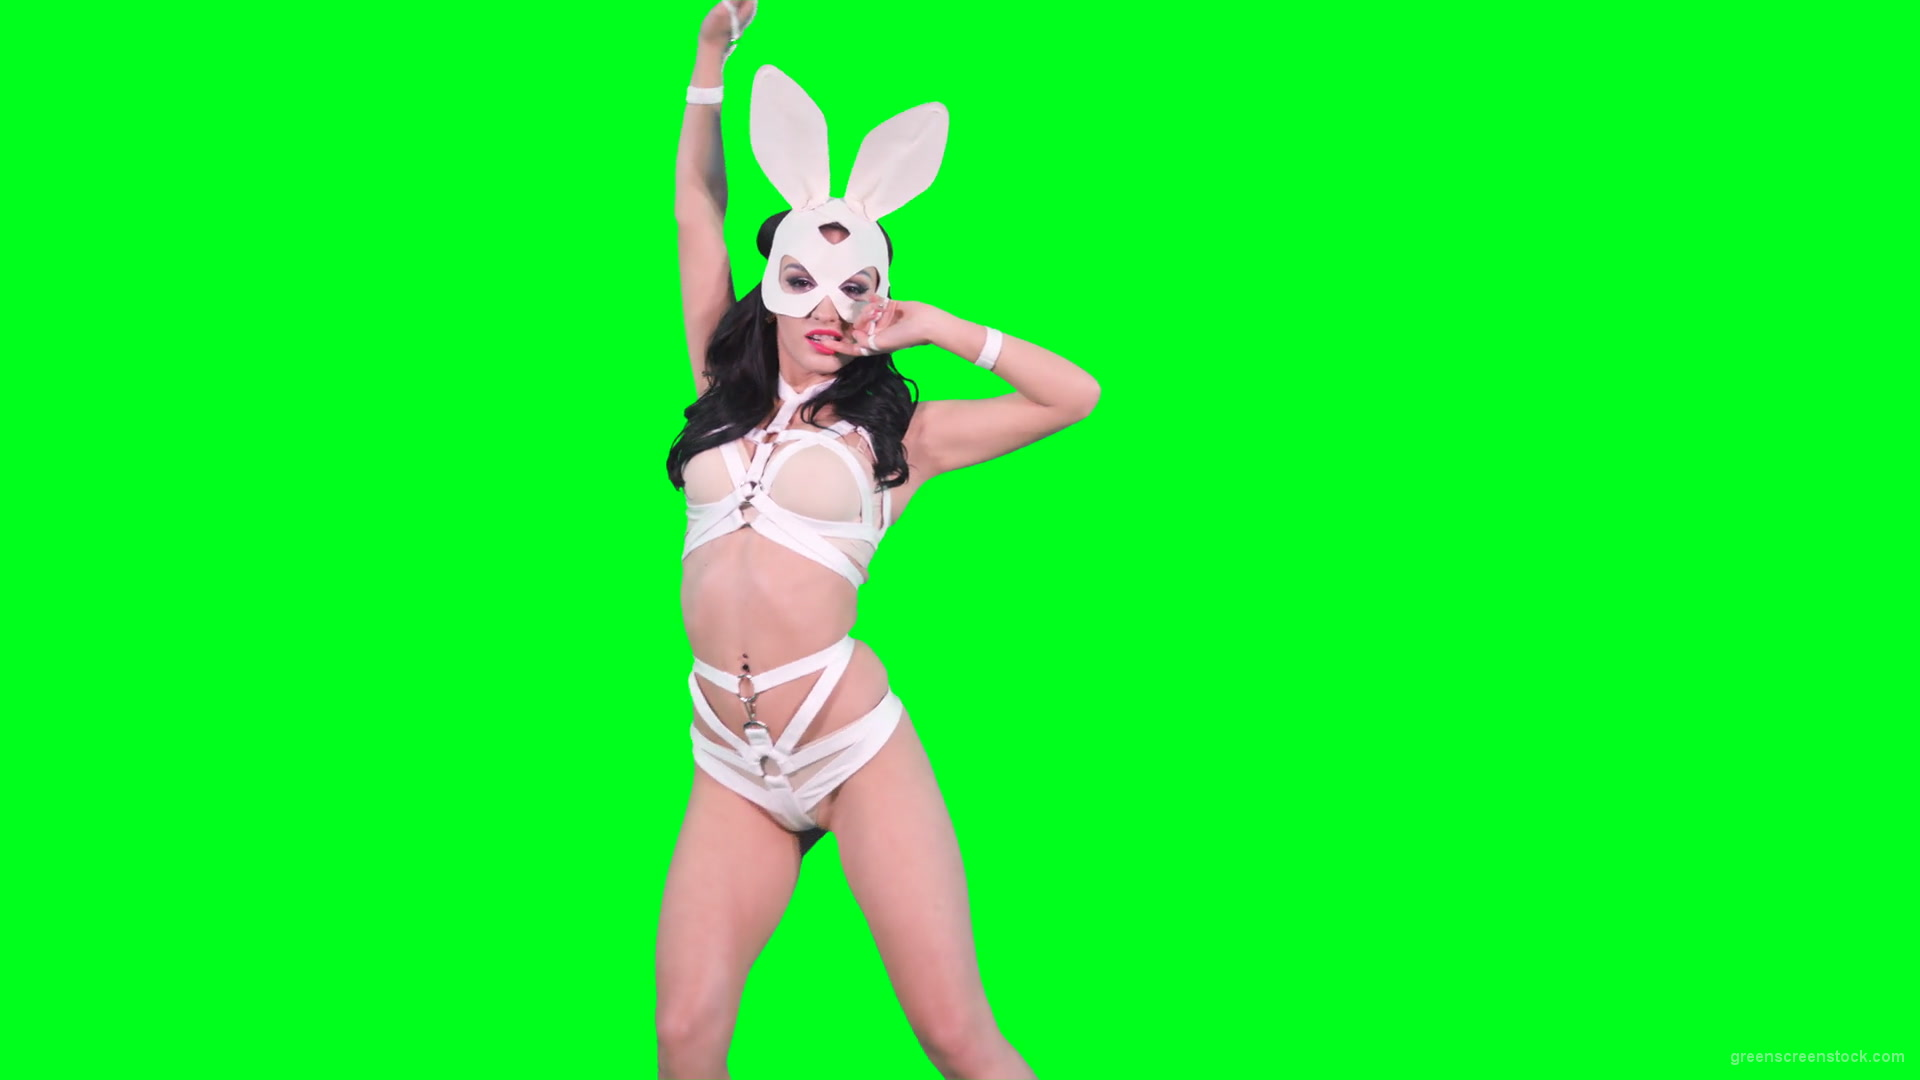 Sexy-bunny-girl-in-rabbit-costume-on-green-screen-4K-Video-Footage-1920_006 Green Screen Stock